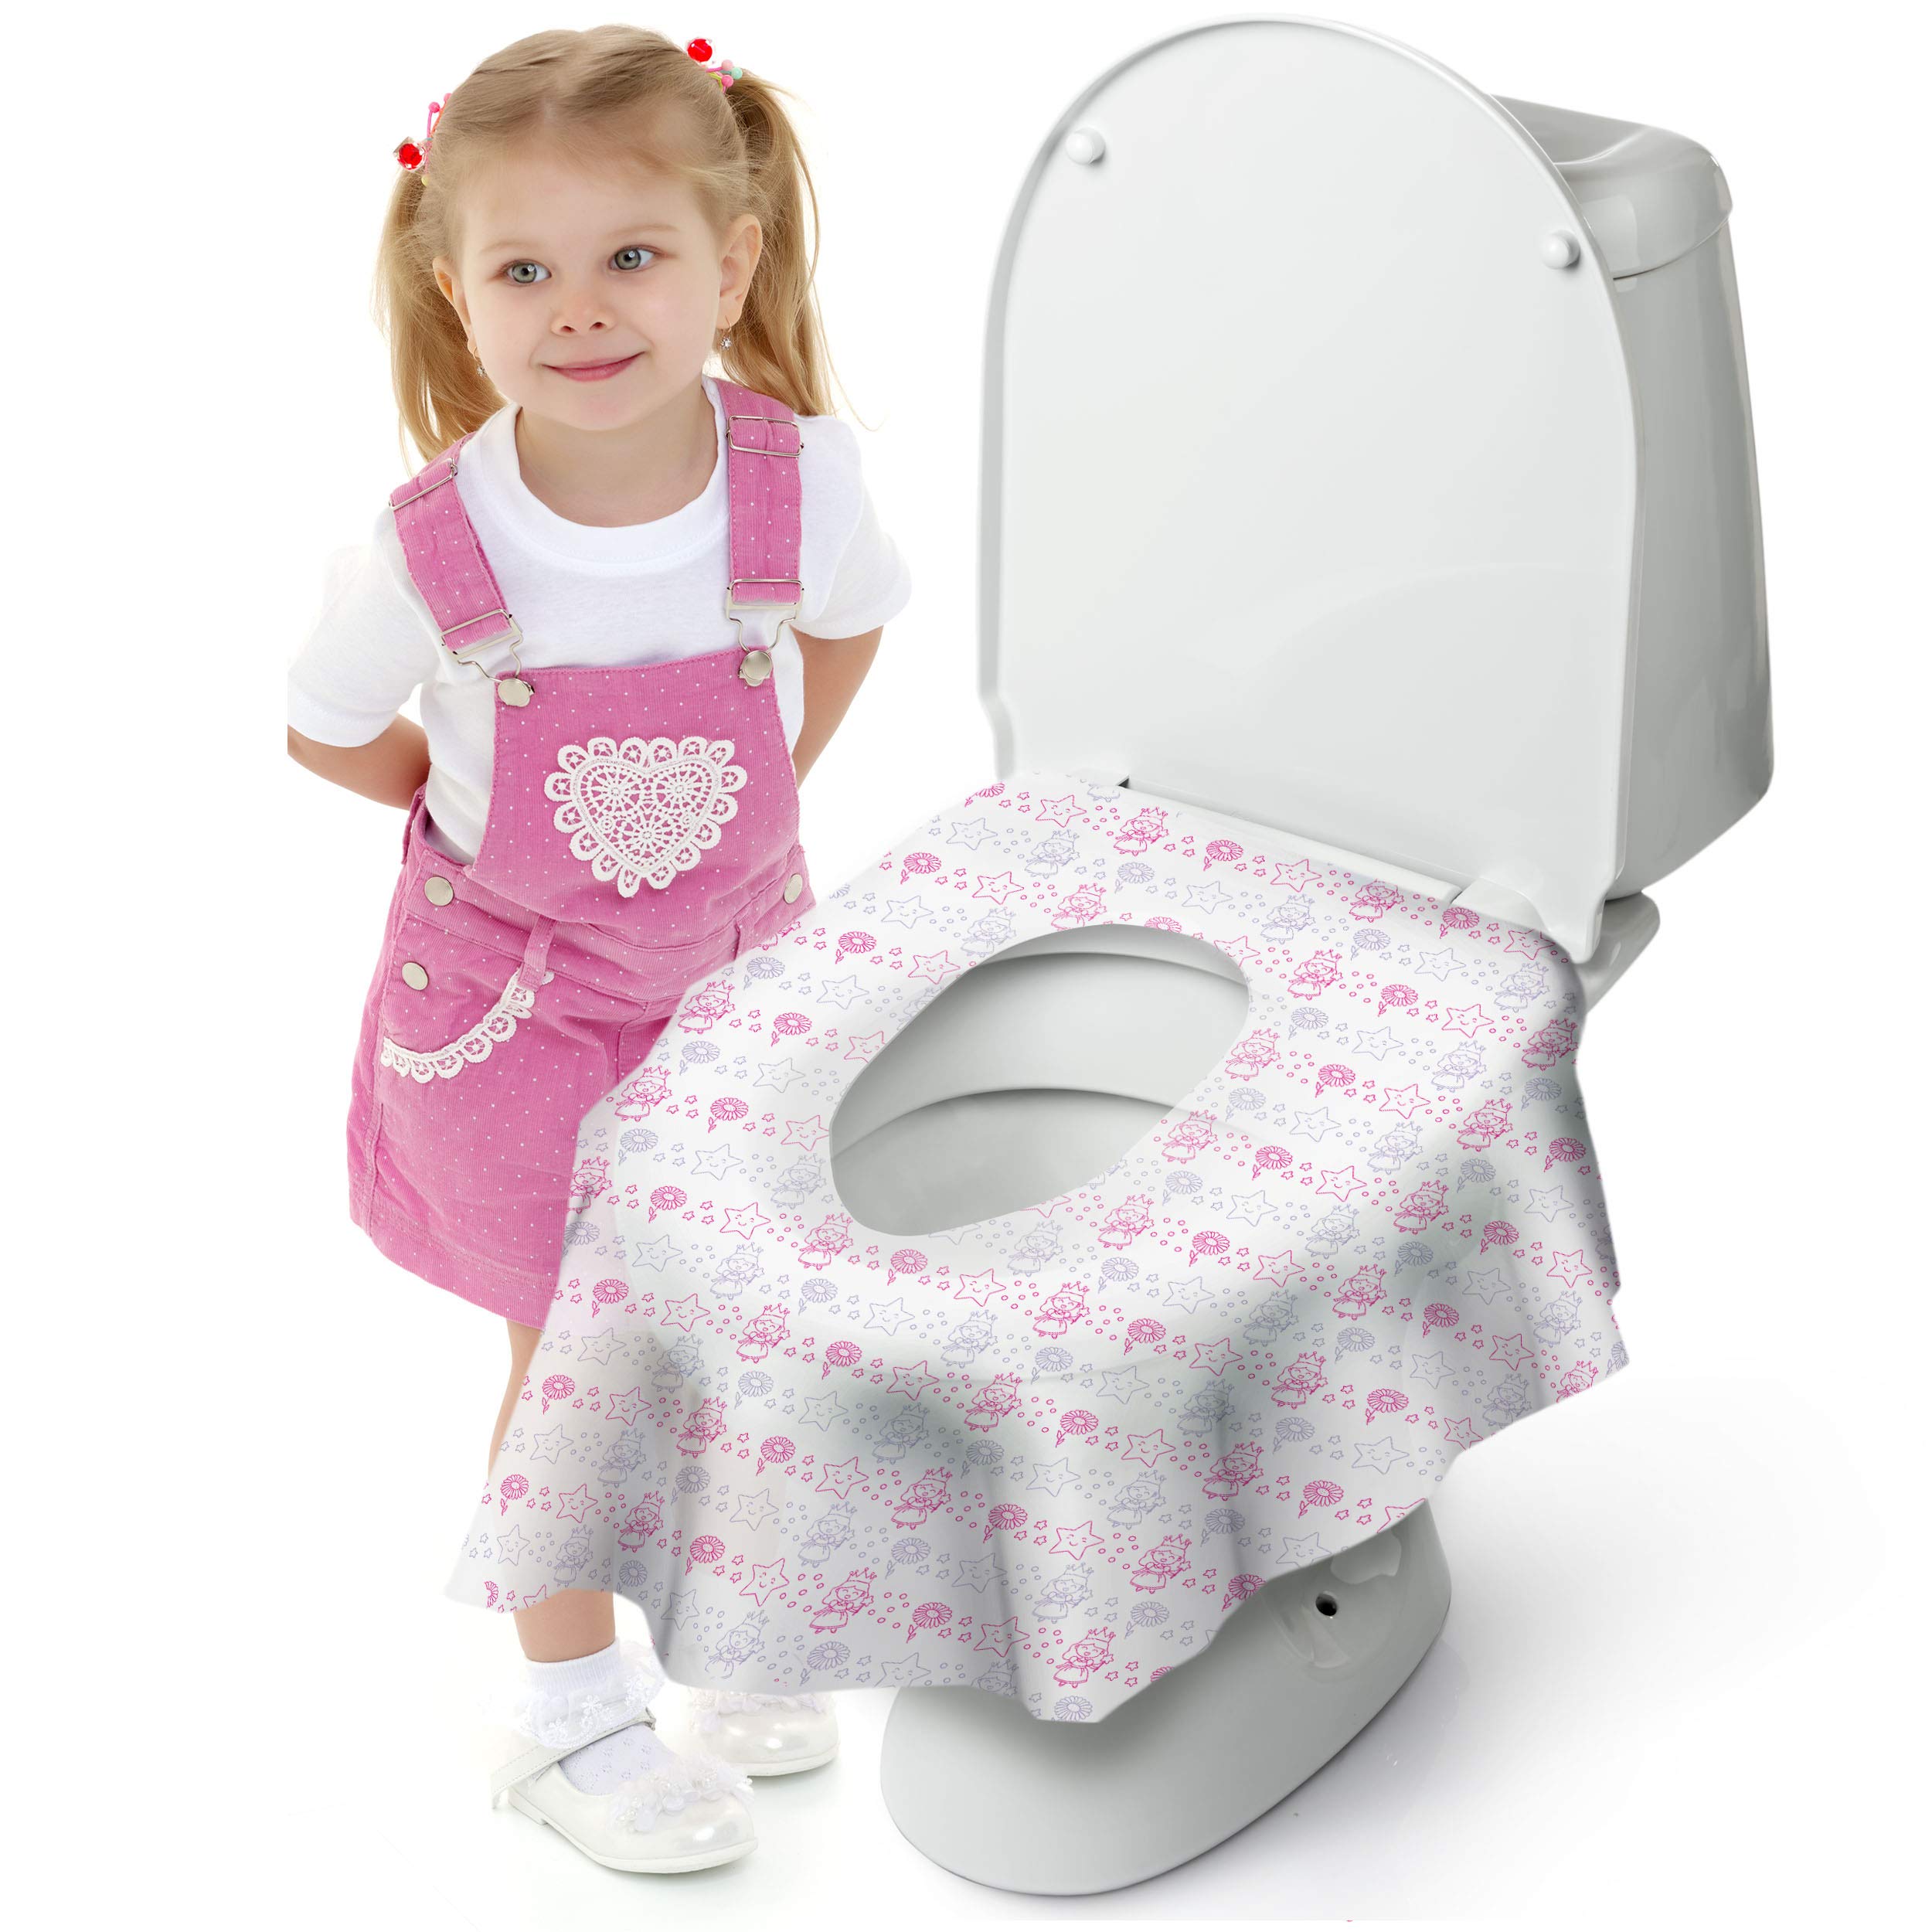 Cadily Princess Disposable Toilet Seat Covers for Kids, Adults